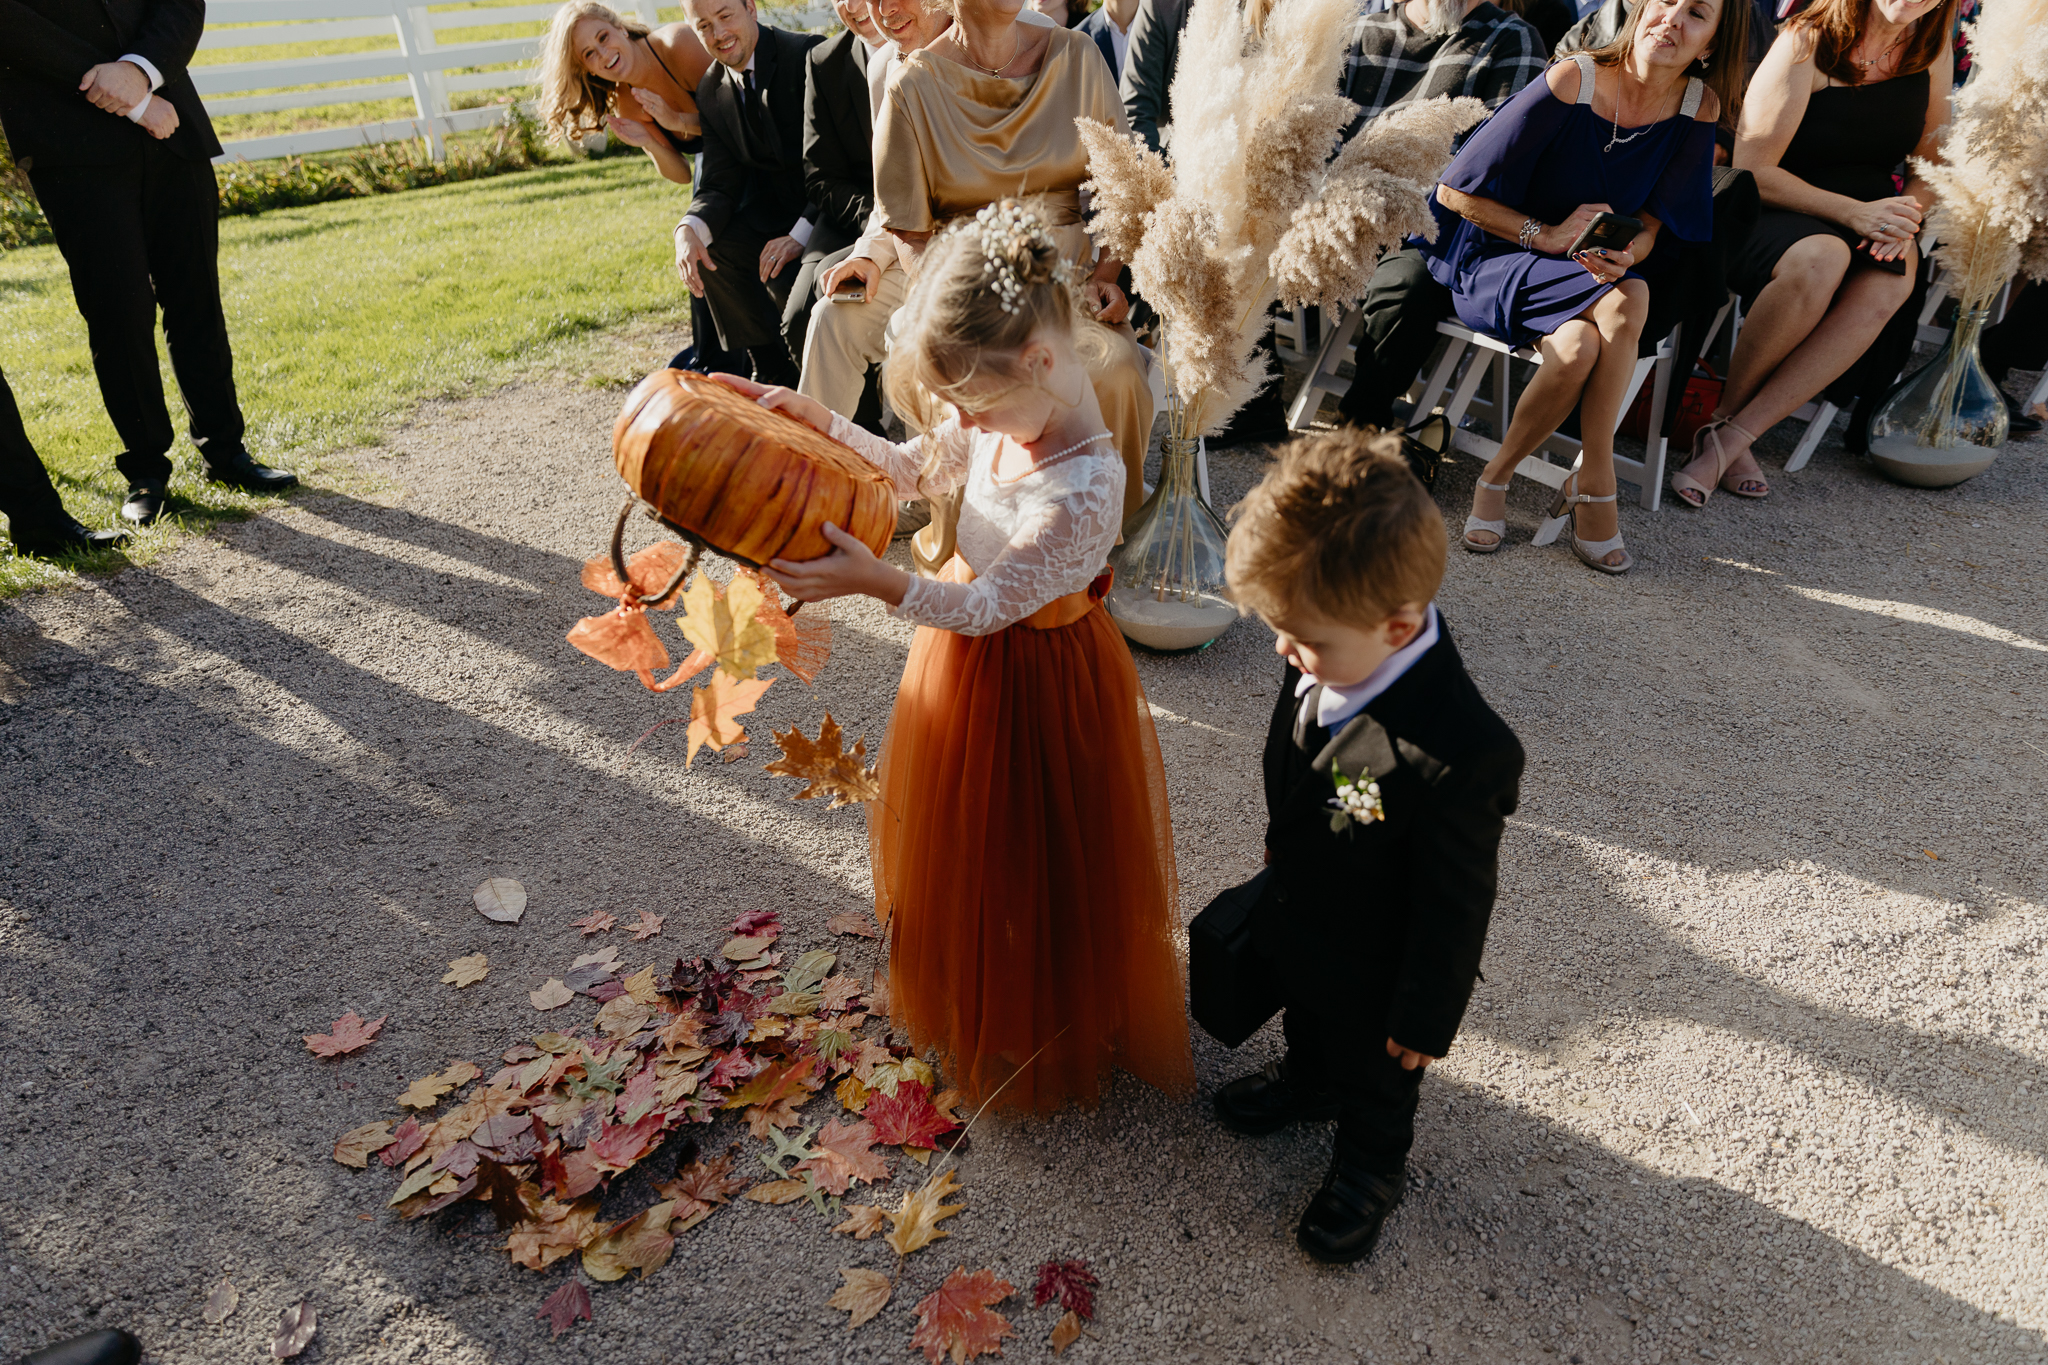 Flower girl dumps leaves on the ground at the wedding ceremony arch